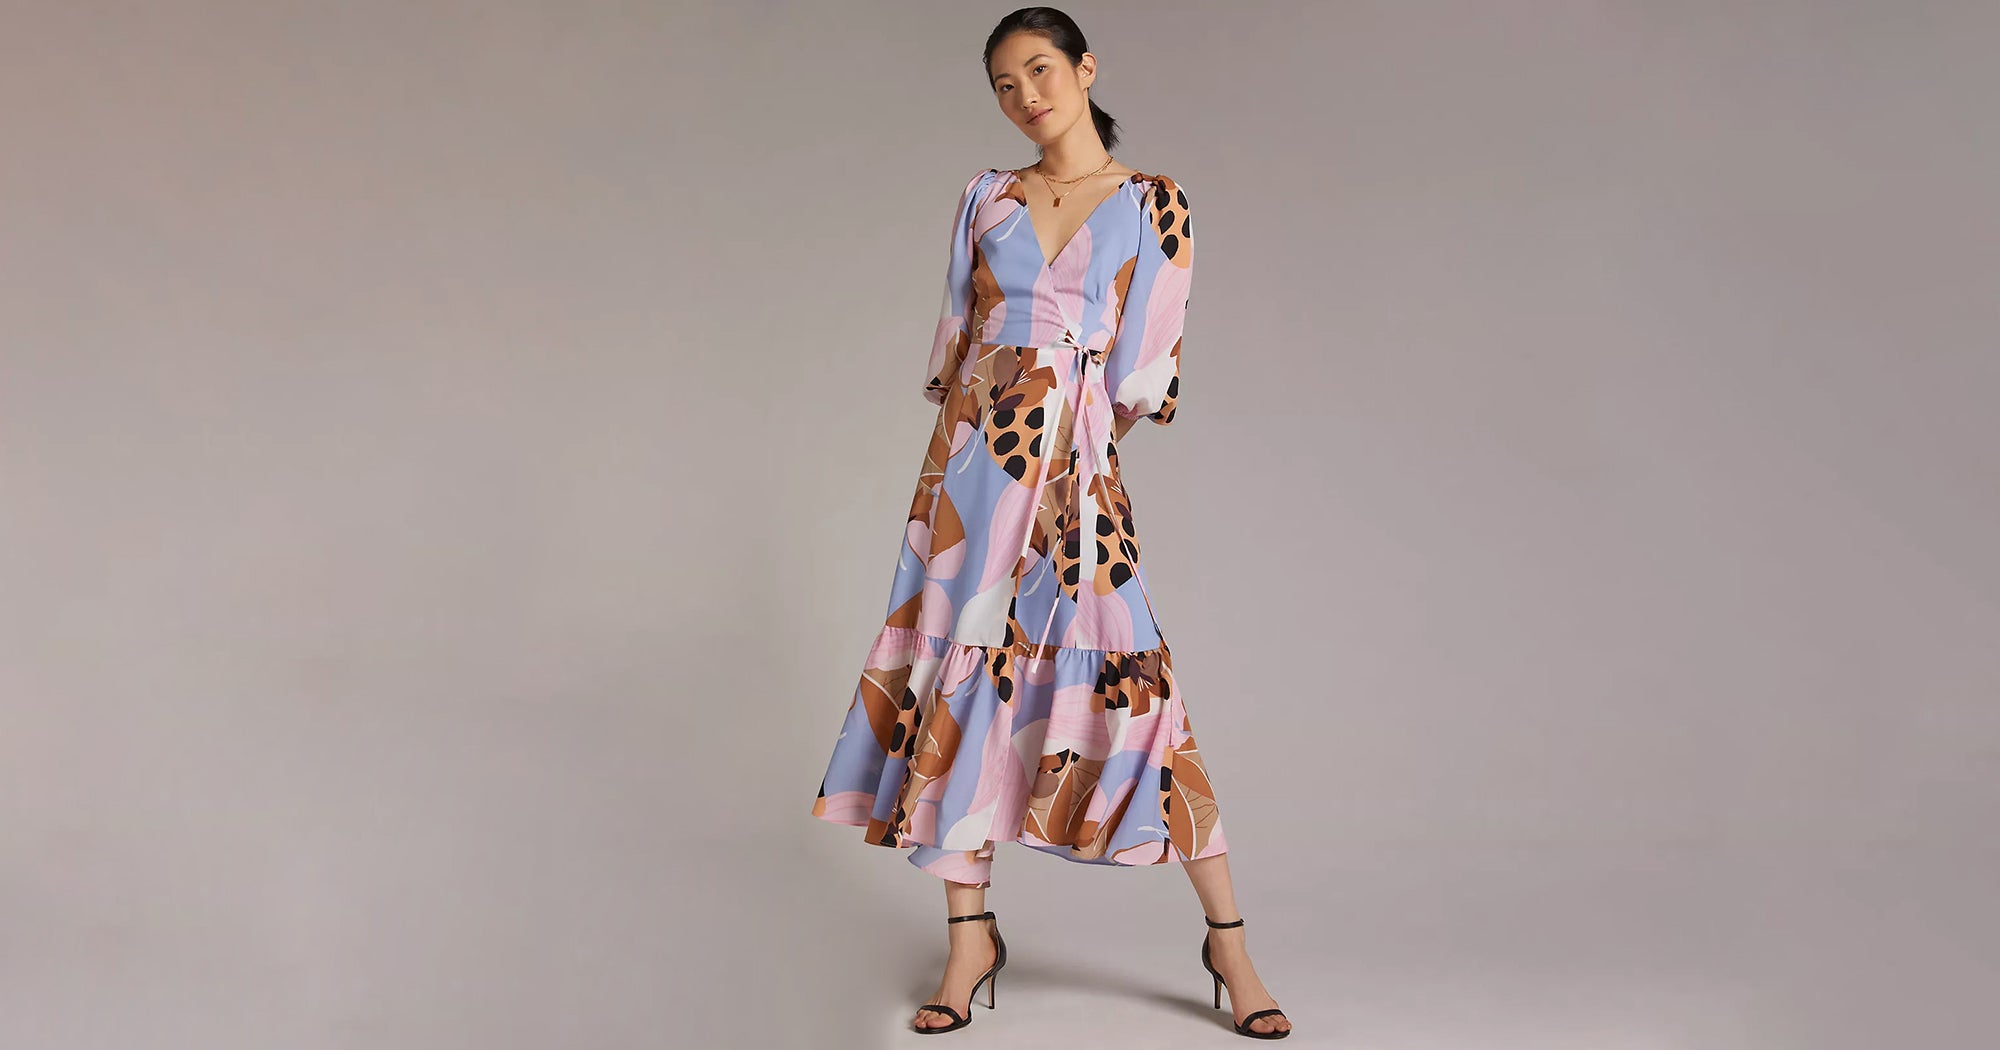 Anthropologie's Sale Section New Spring Styles